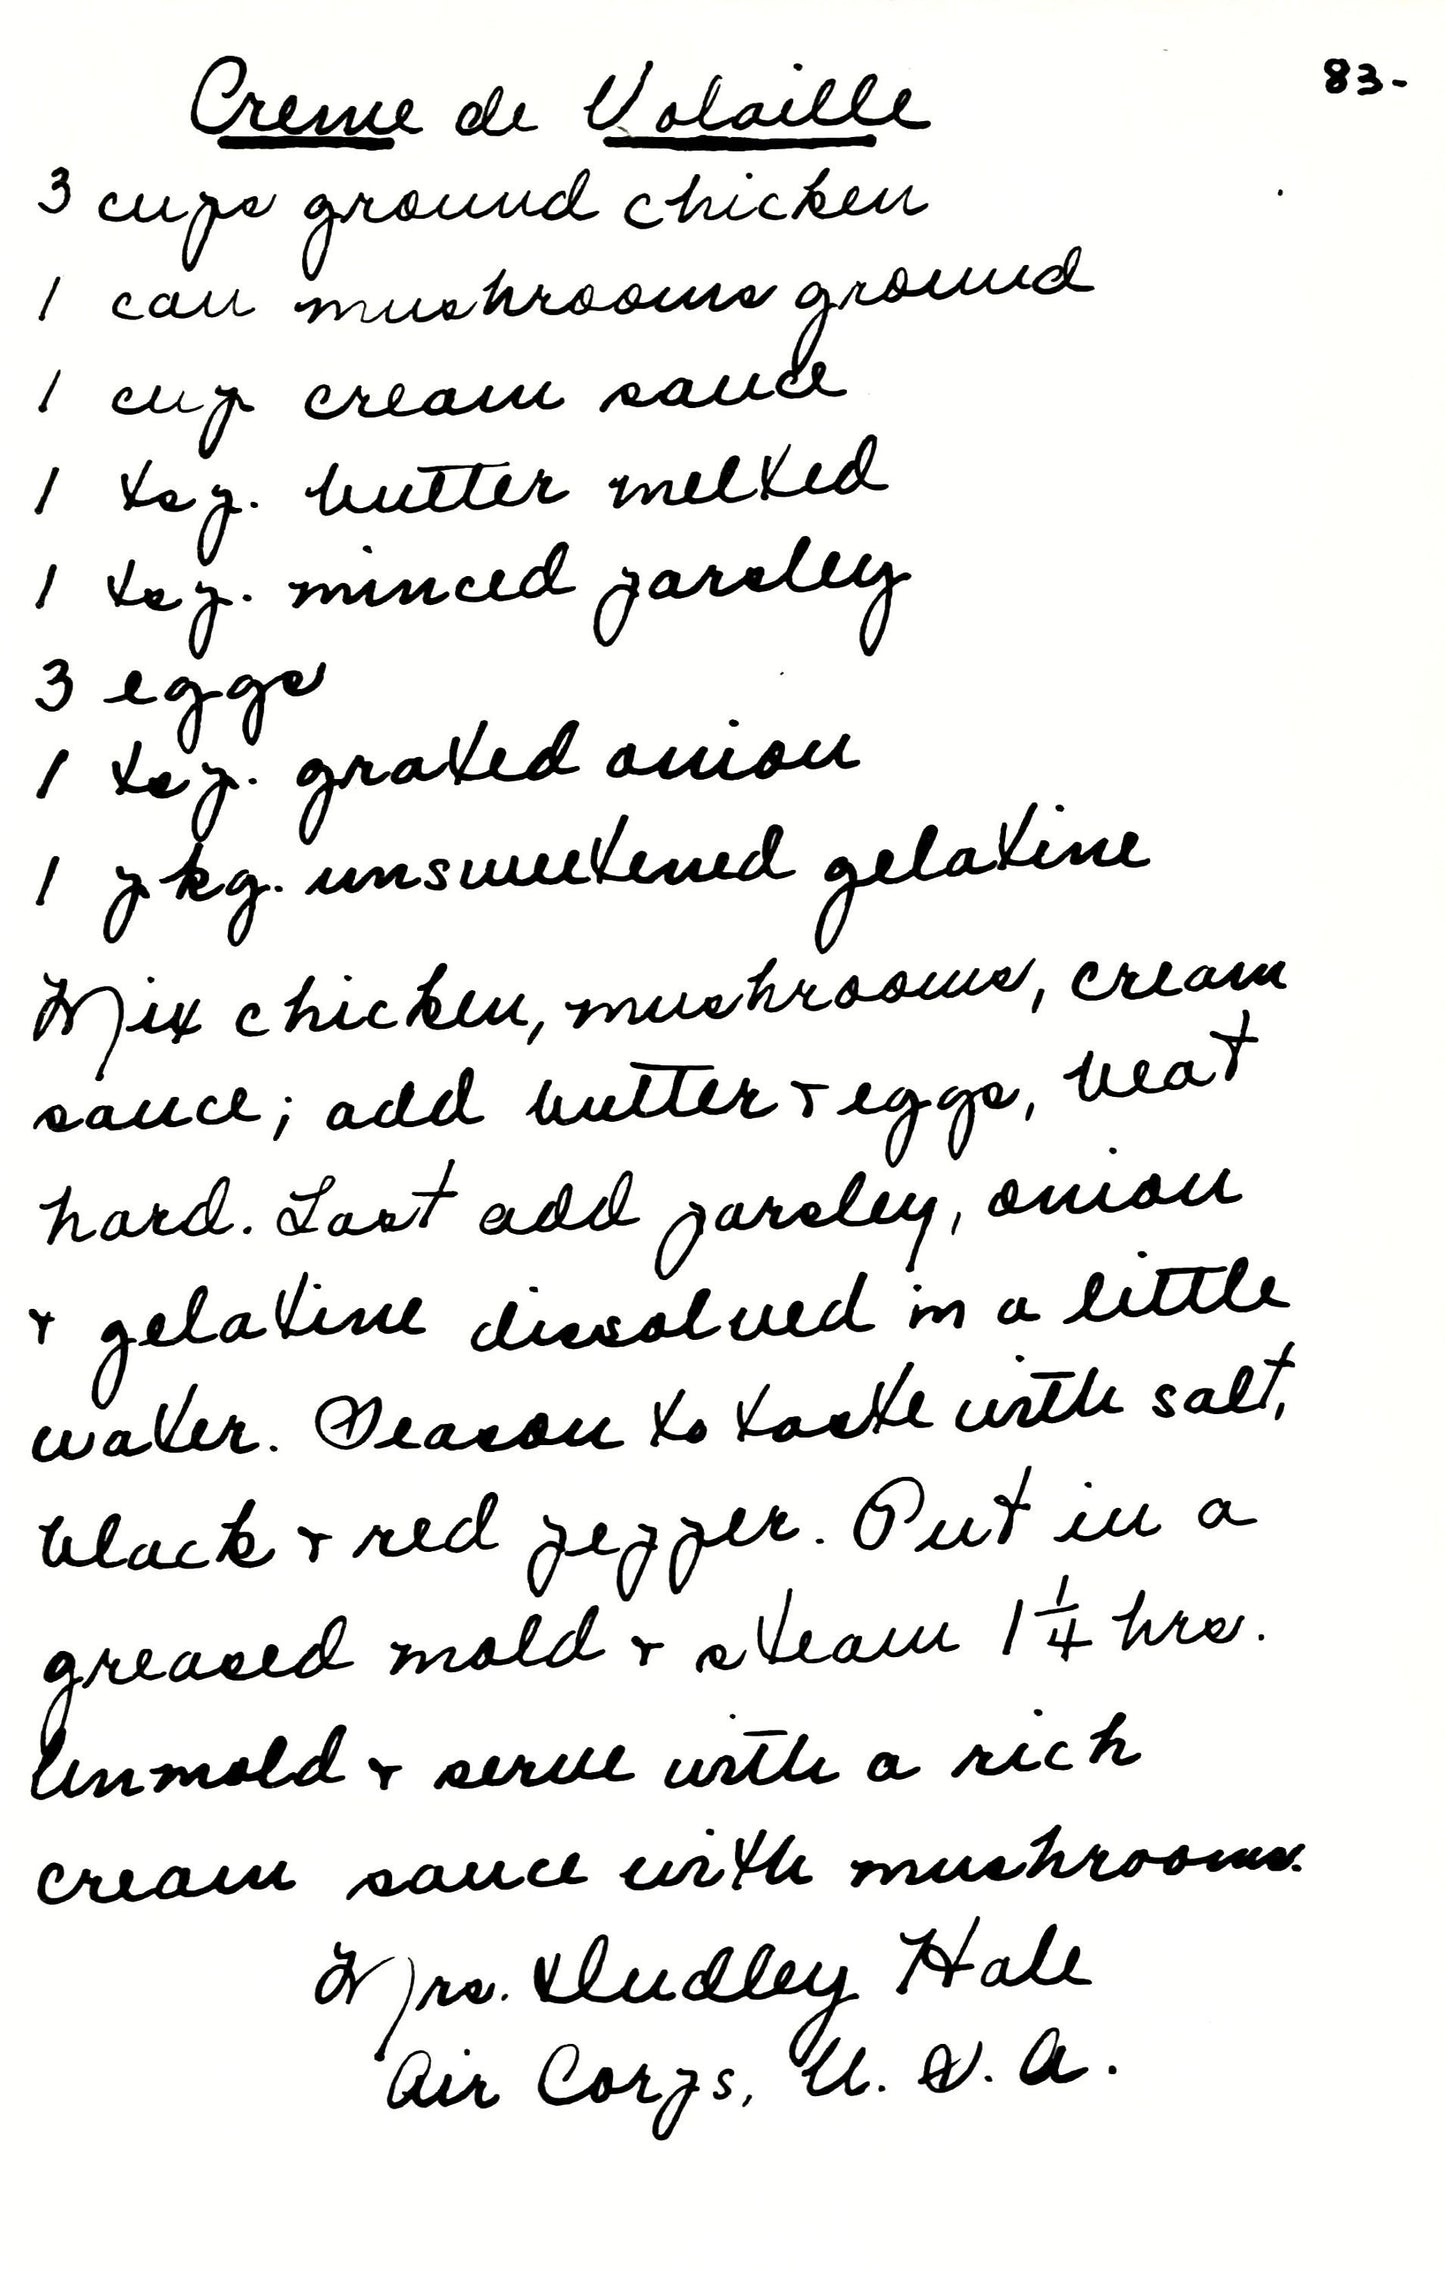 Southern Cooking Handwritten Recipes Set 1 [142 Images]